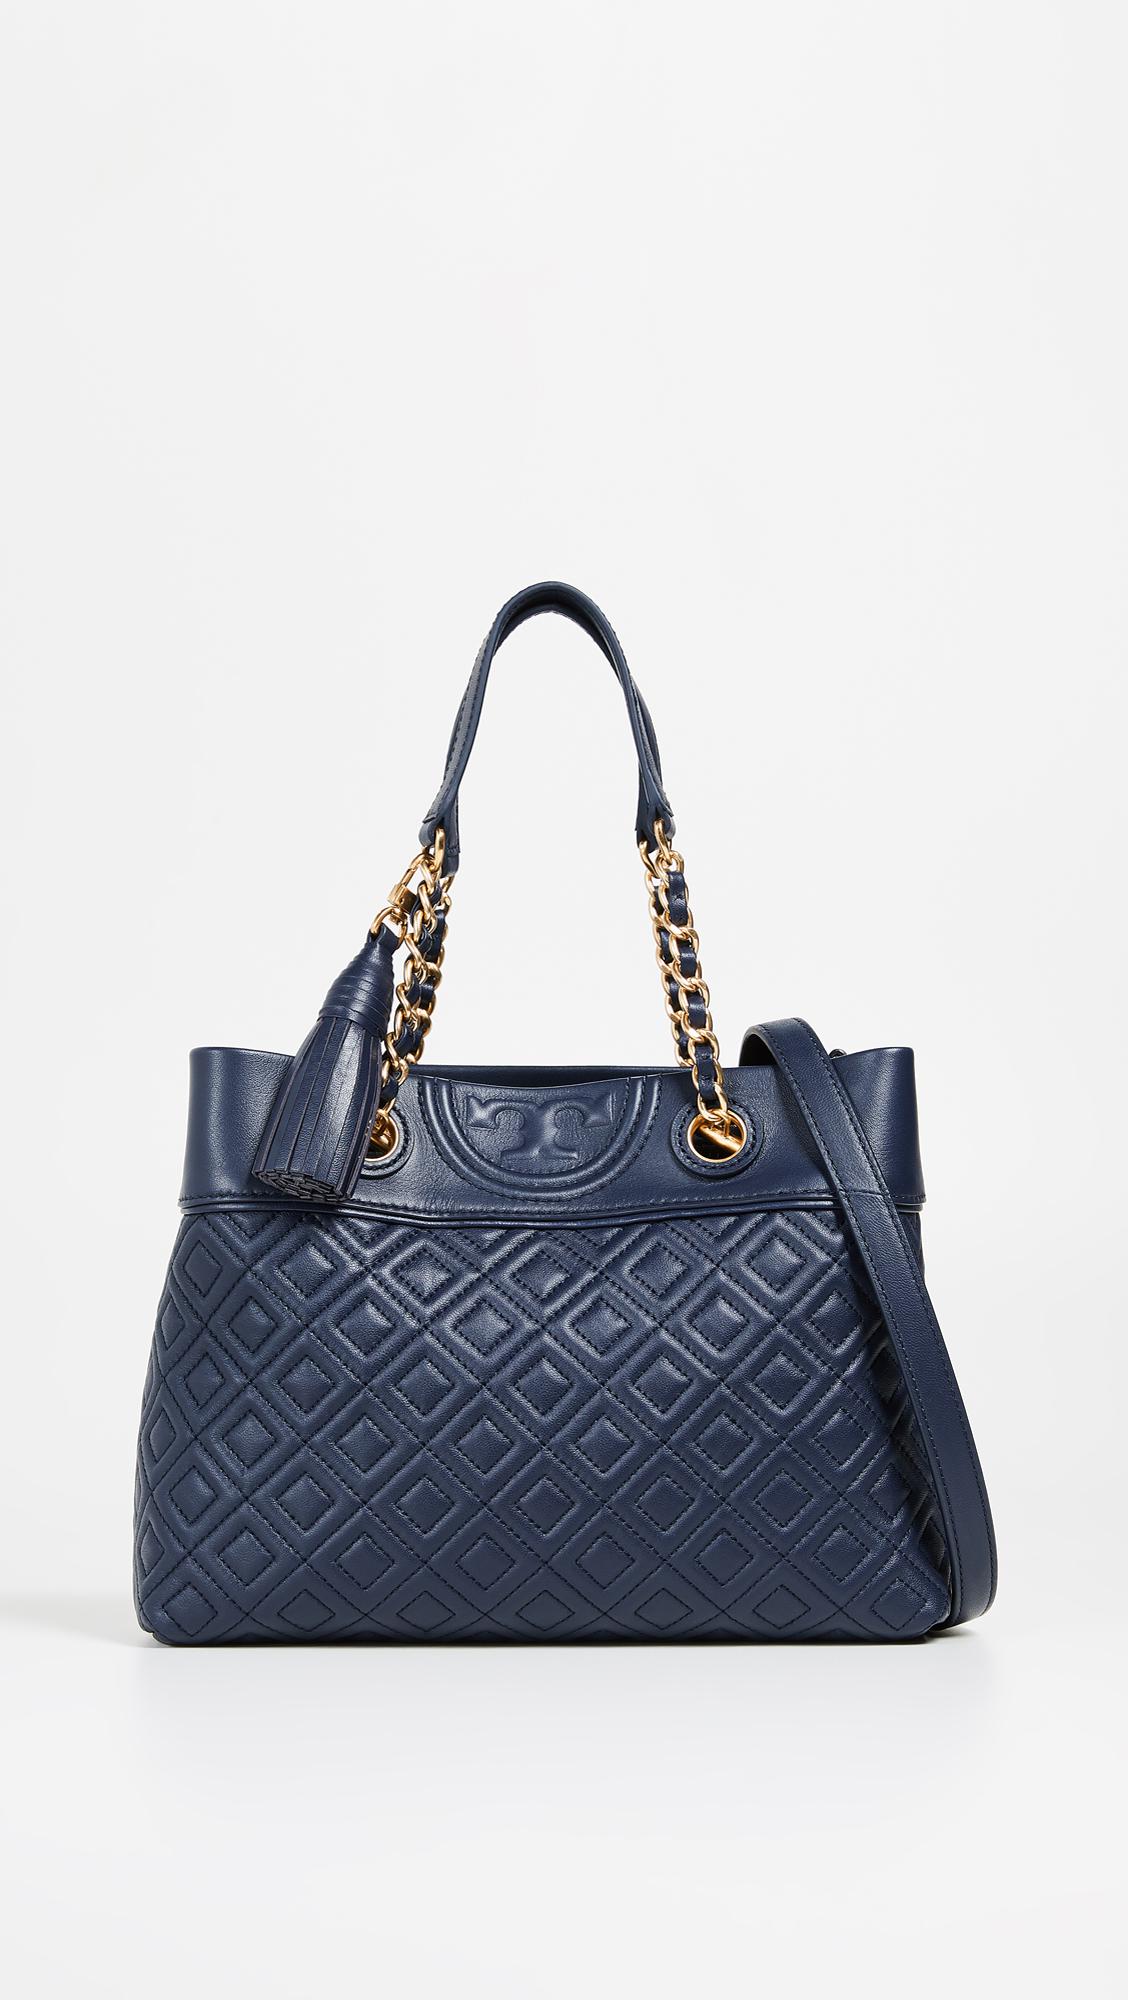 Tory Burch Fleming Small Tote Bag in Blue